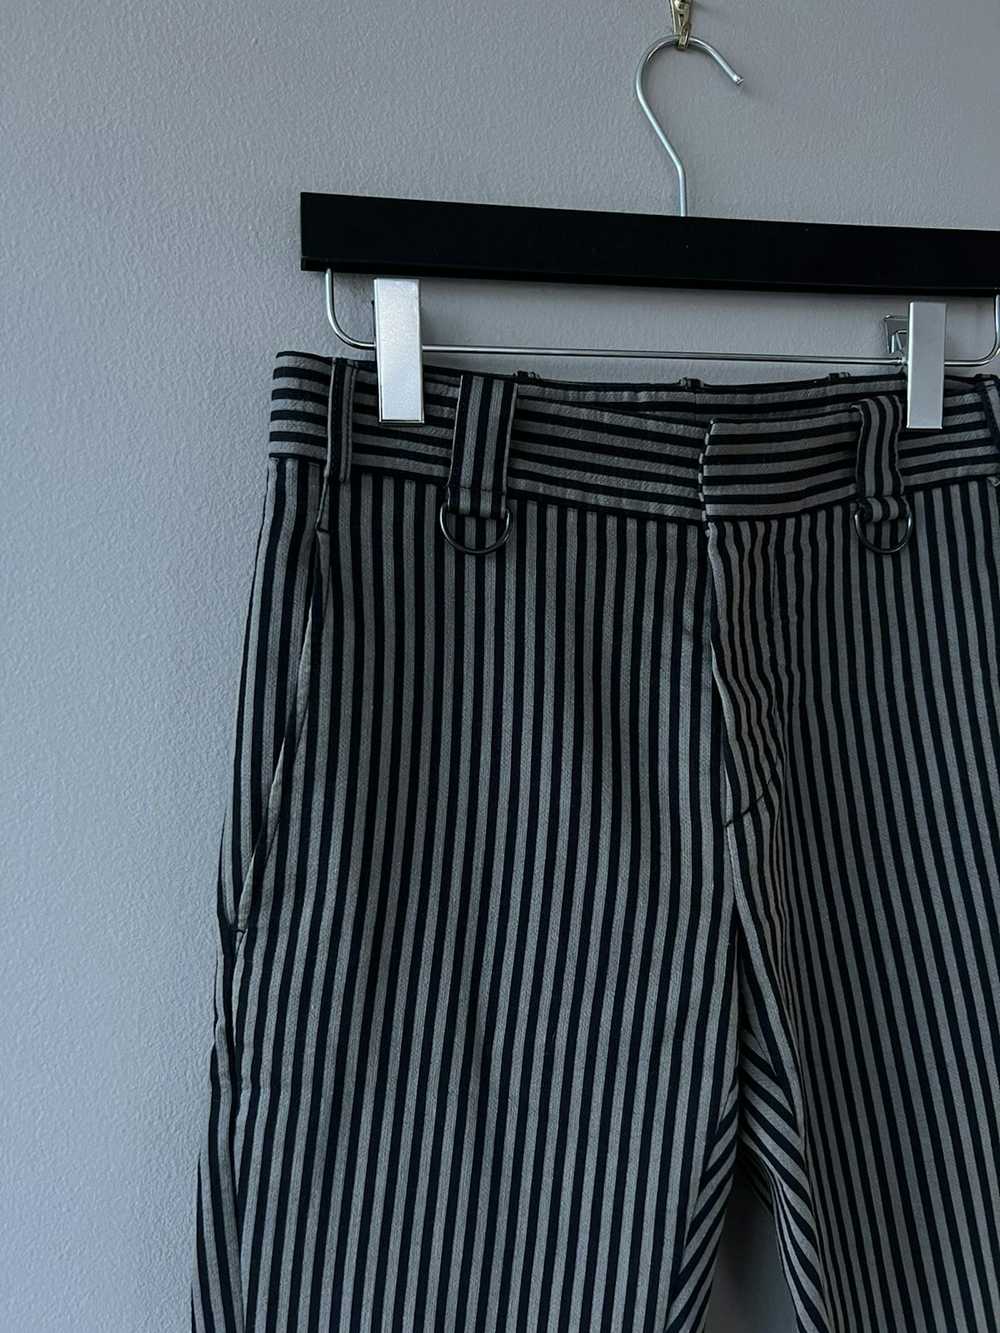 Ann Demeulemeester AW15 Striped Slim Trousers - image 3